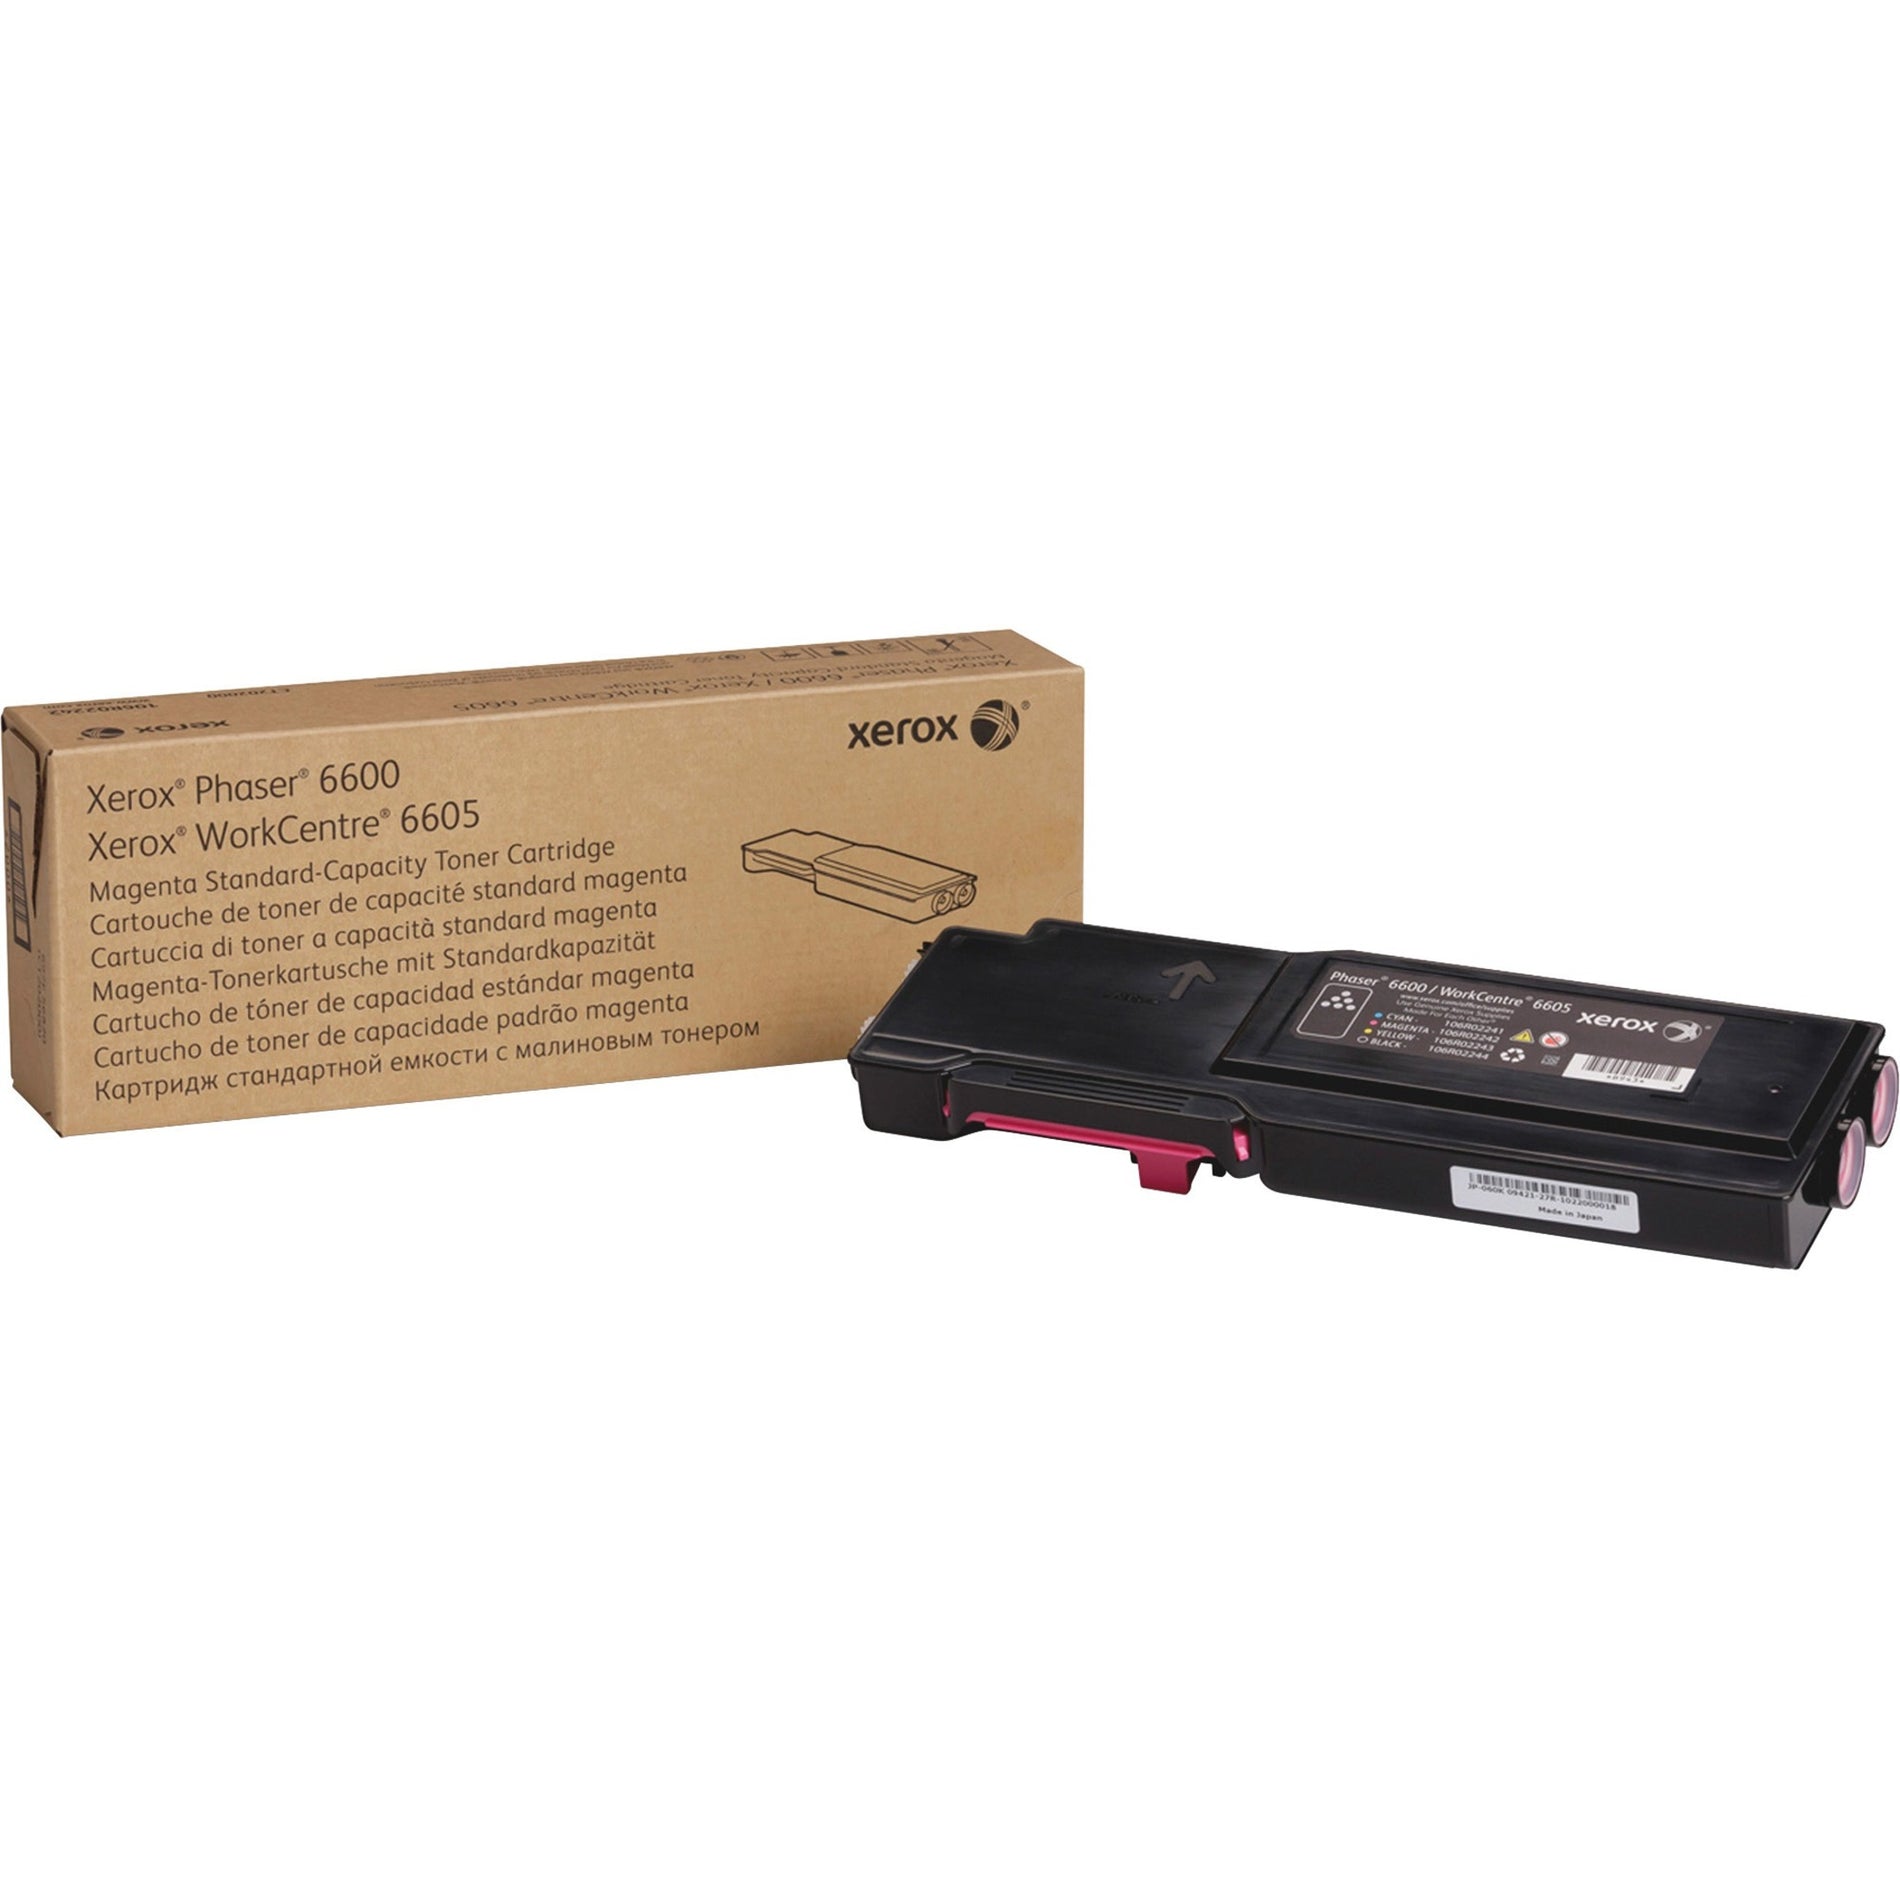 Xerox 106R02242 Phaser 6600/WorkCentre 6605 Standard Toner Cartridge, Magenta, 2,000 Page Yield